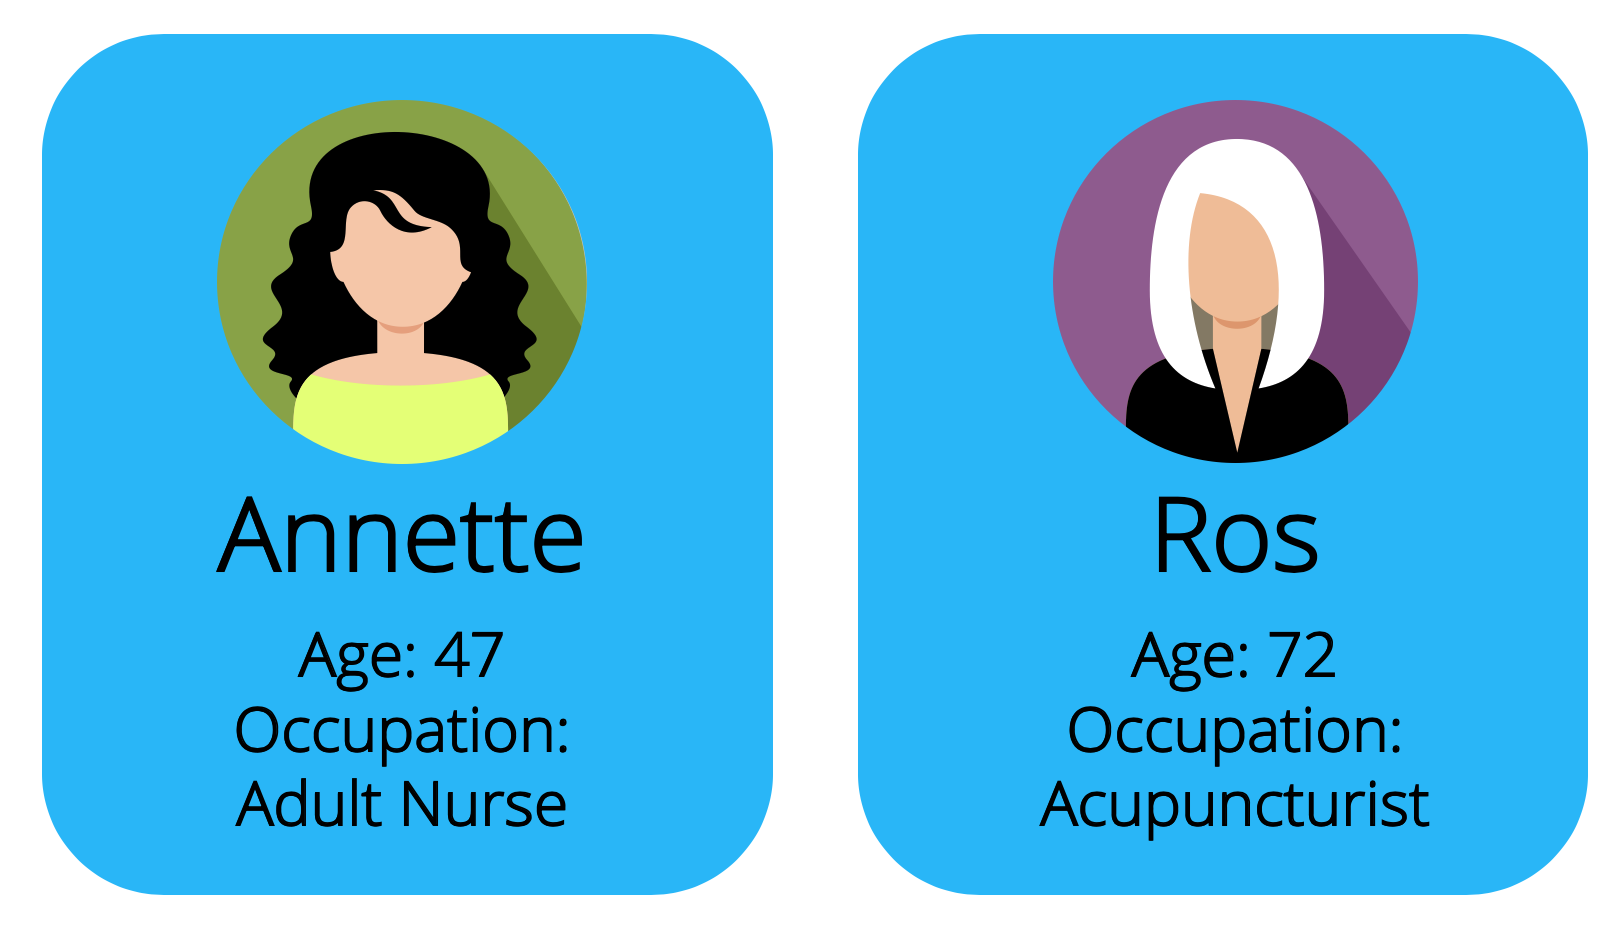 Profile cards for three different women, showing name, age and occupation.